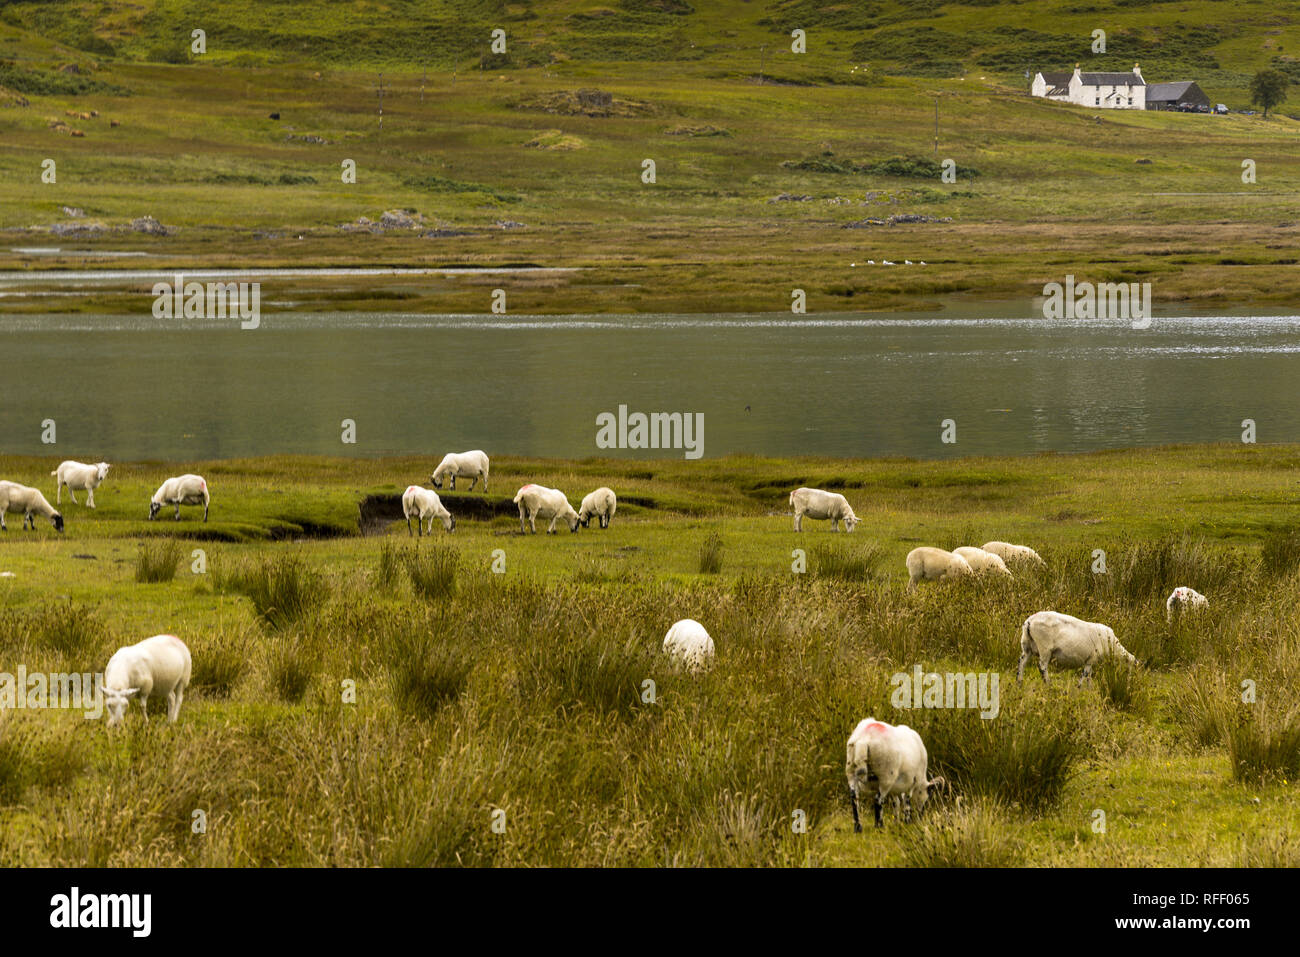 Domestic sheep on pasture in Scotland Highlands Stock Photo